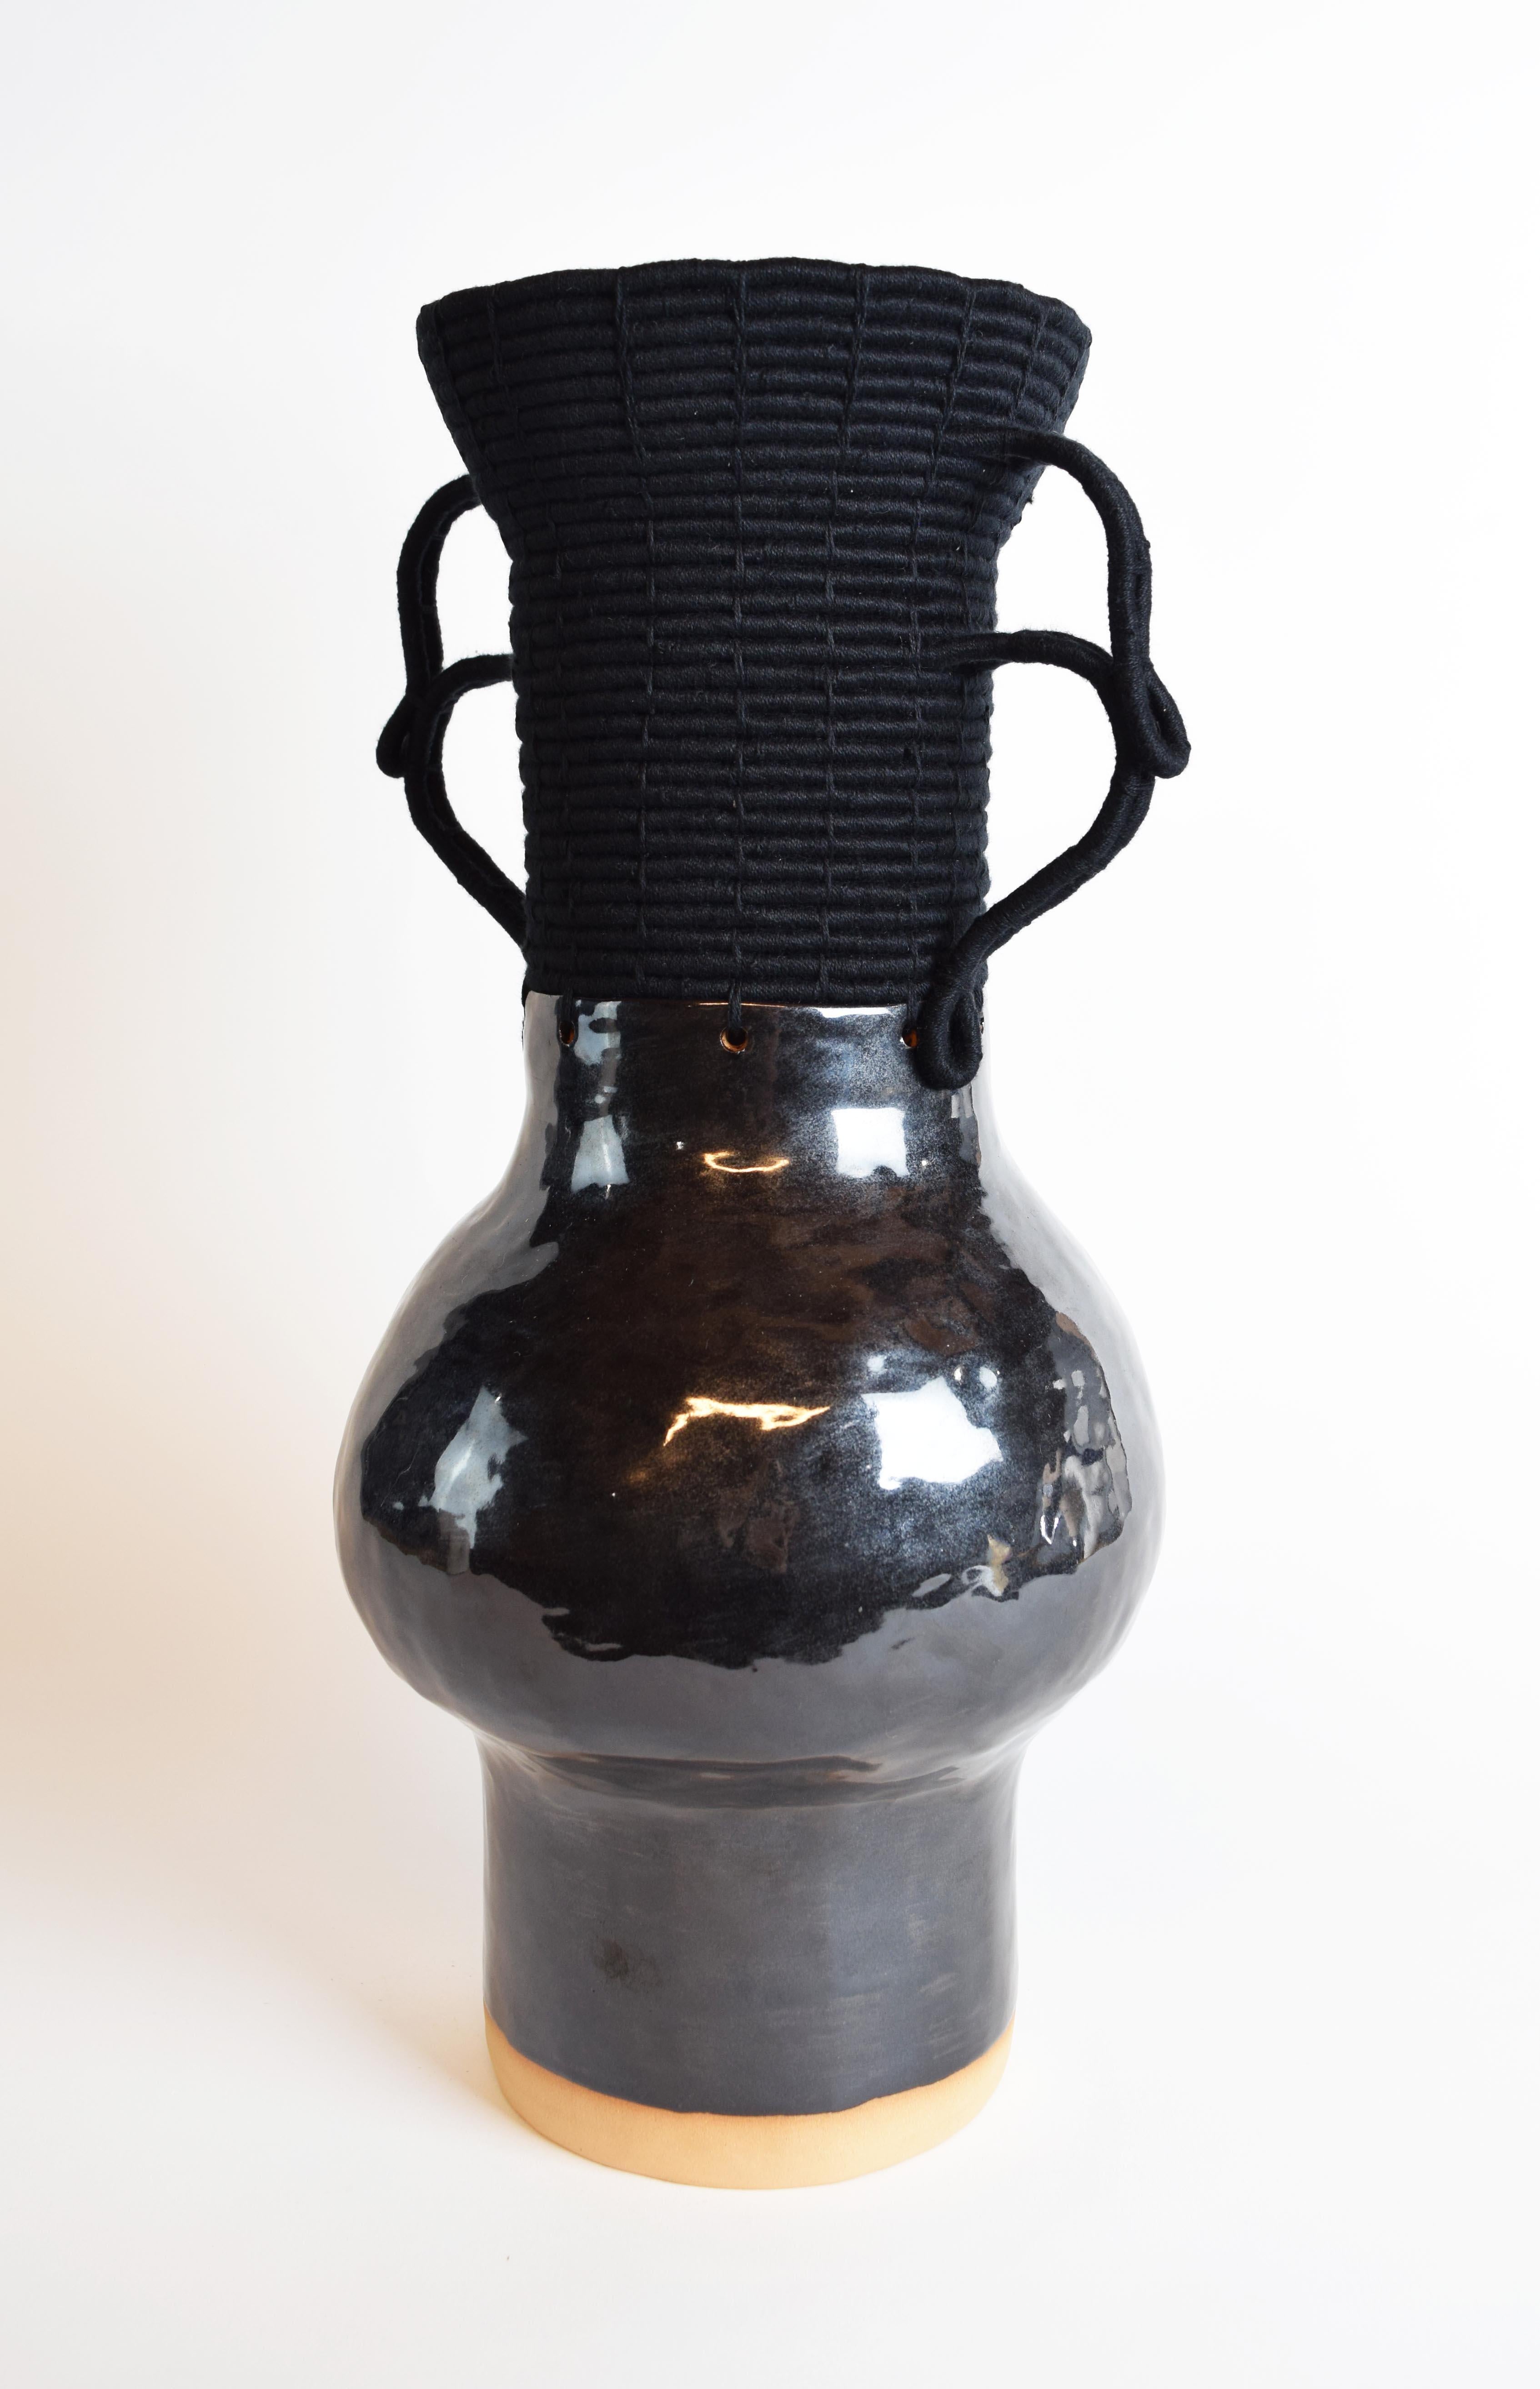 Organic Modern One of a Kind Vessel #752, Hand Formed Black Ceramic and Woven Black Cotton